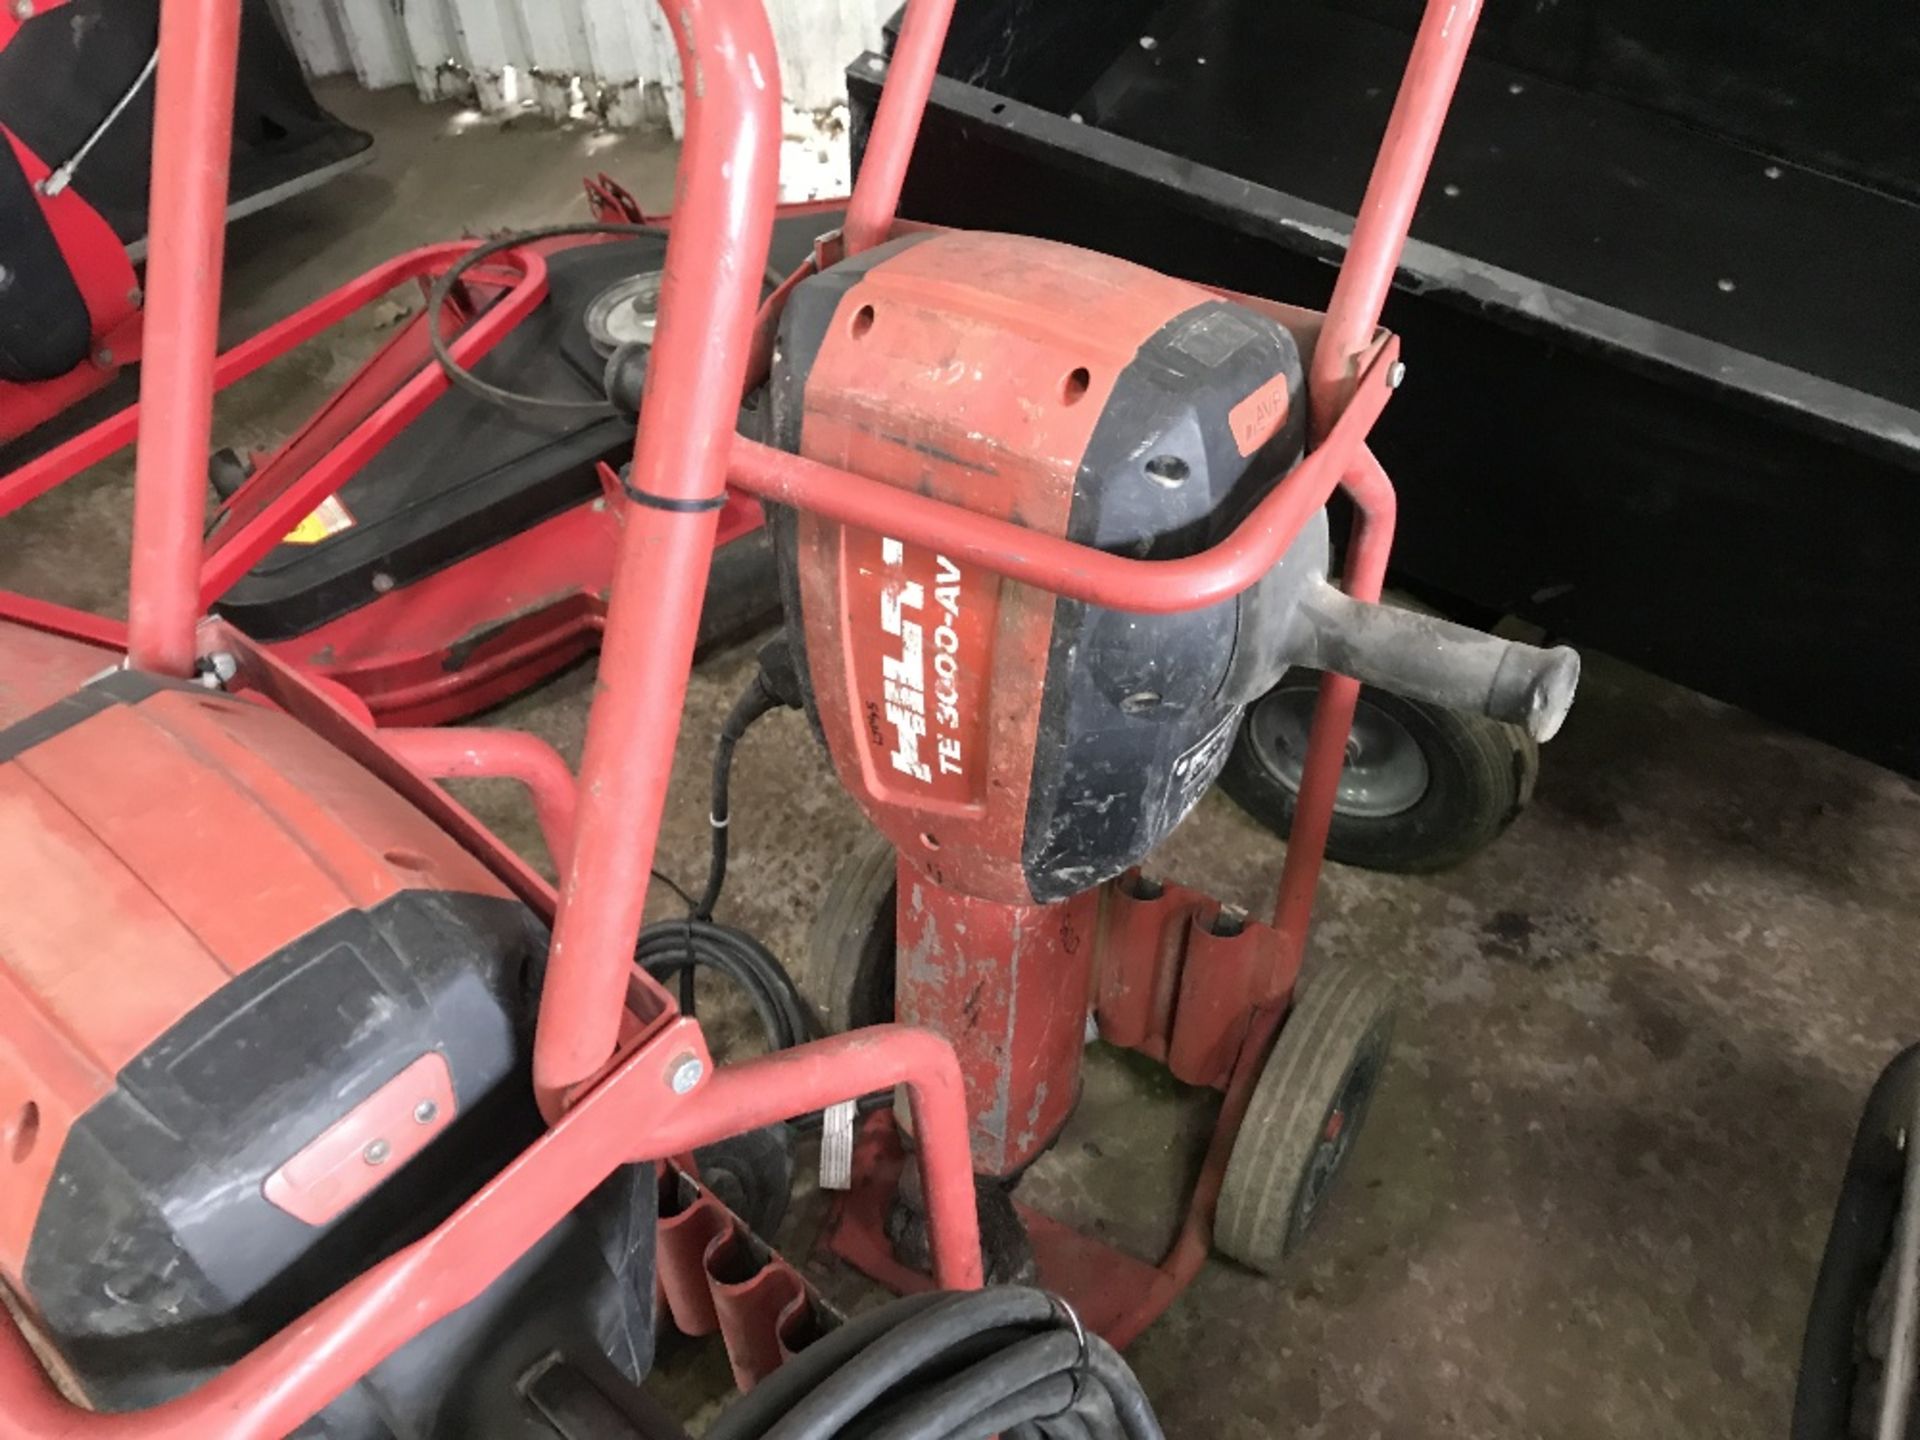 3 X HILTI 3000-AVR HEAVY DUTY UPRIGHT BREAKERS UNTESTED, CONDITION UNKNOWN Sold Under The - Image 3 of 4